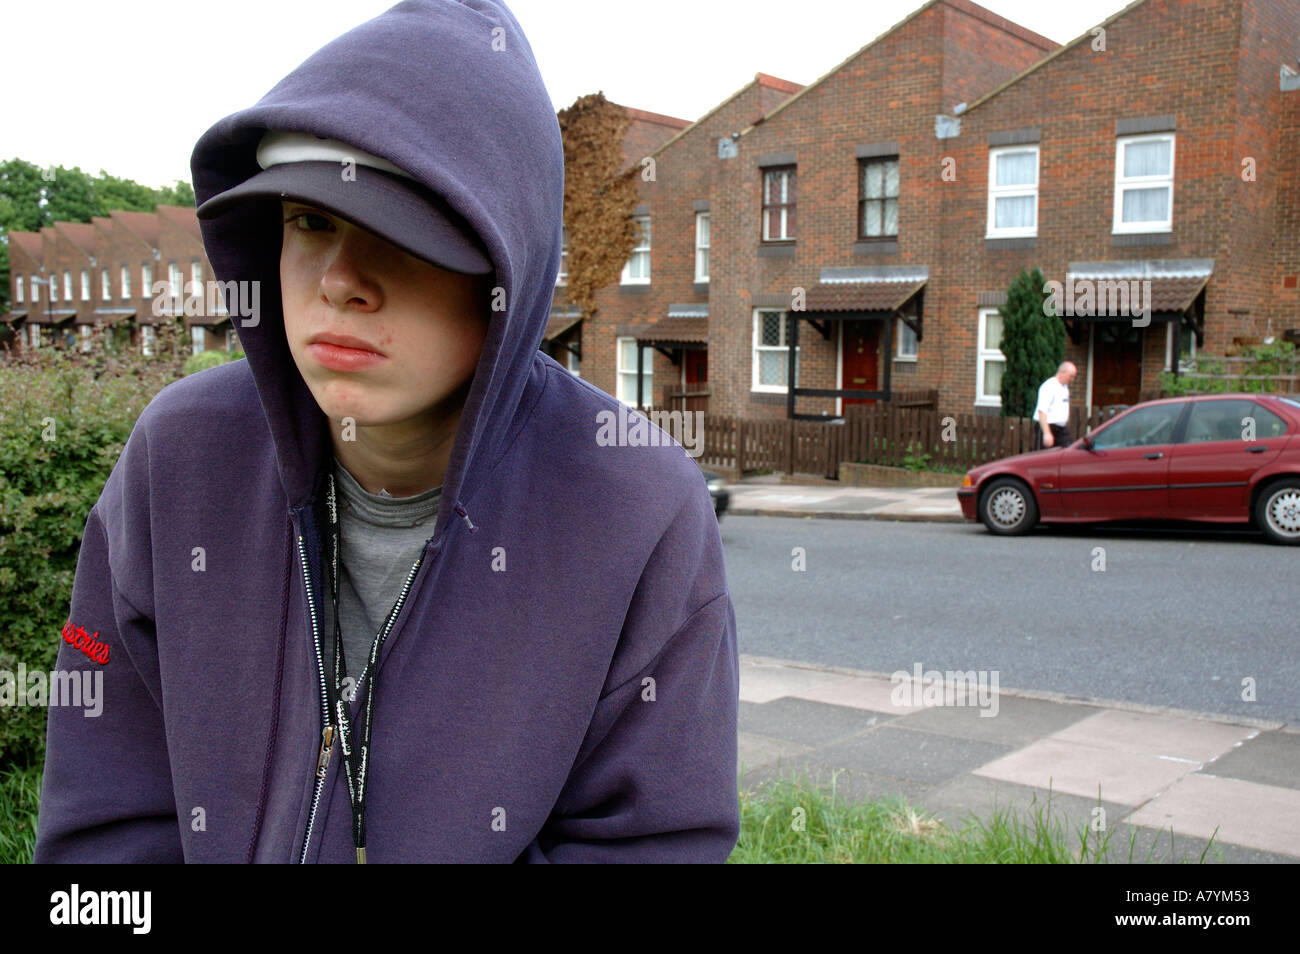 Young boy hanging around the streets dressed in hoodie looking threatening and bored. Stock Photo